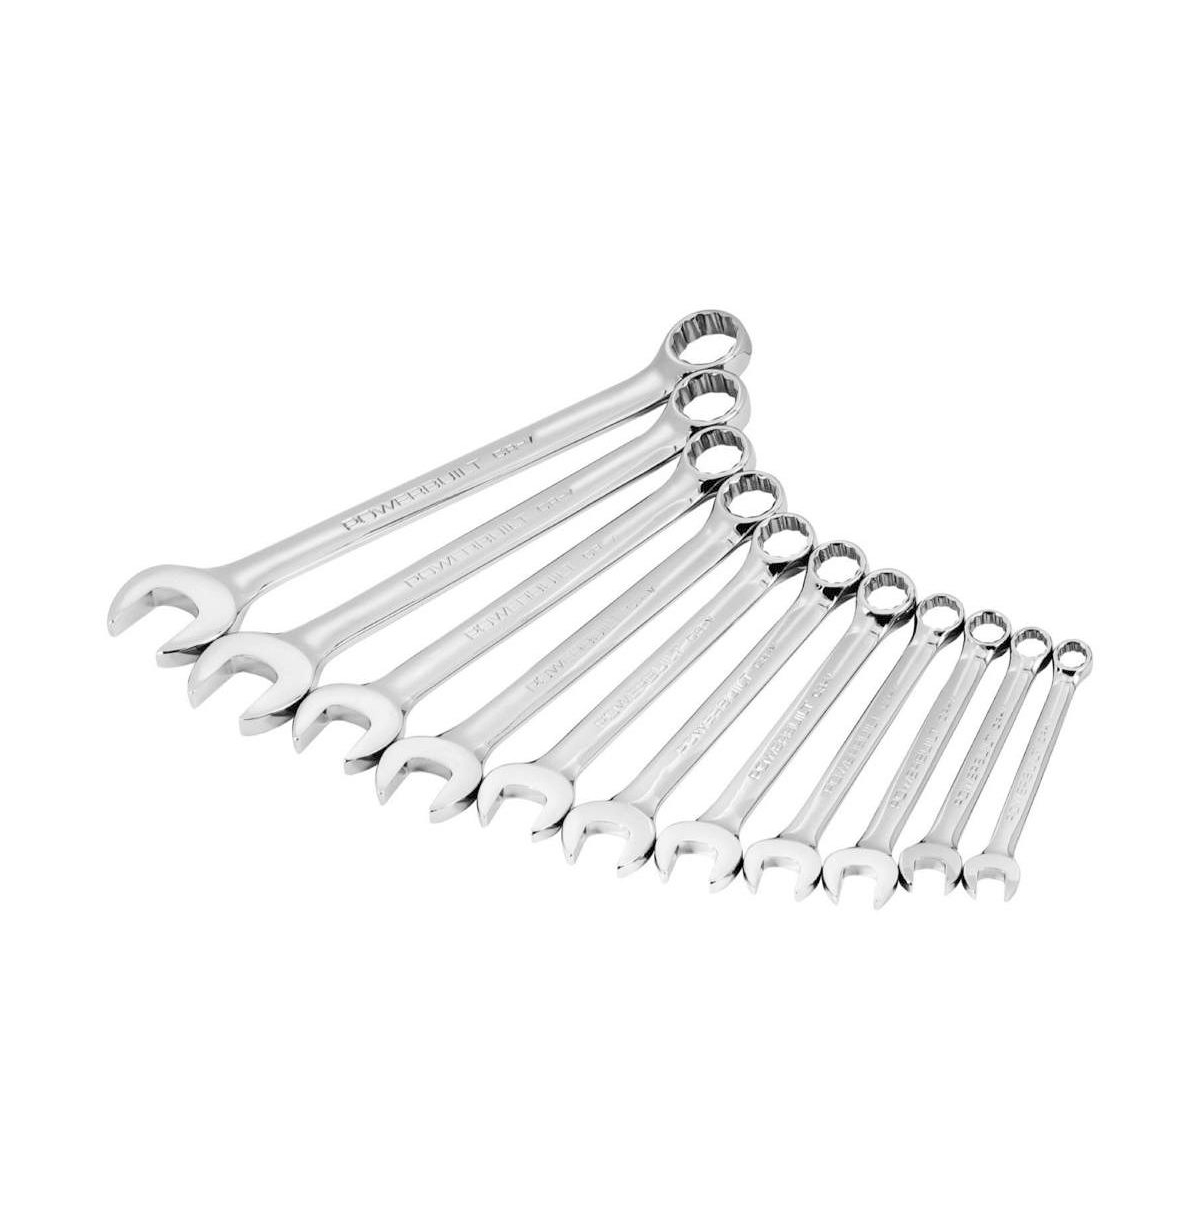 11 Piece Sae Combination Wrench Set - Silver